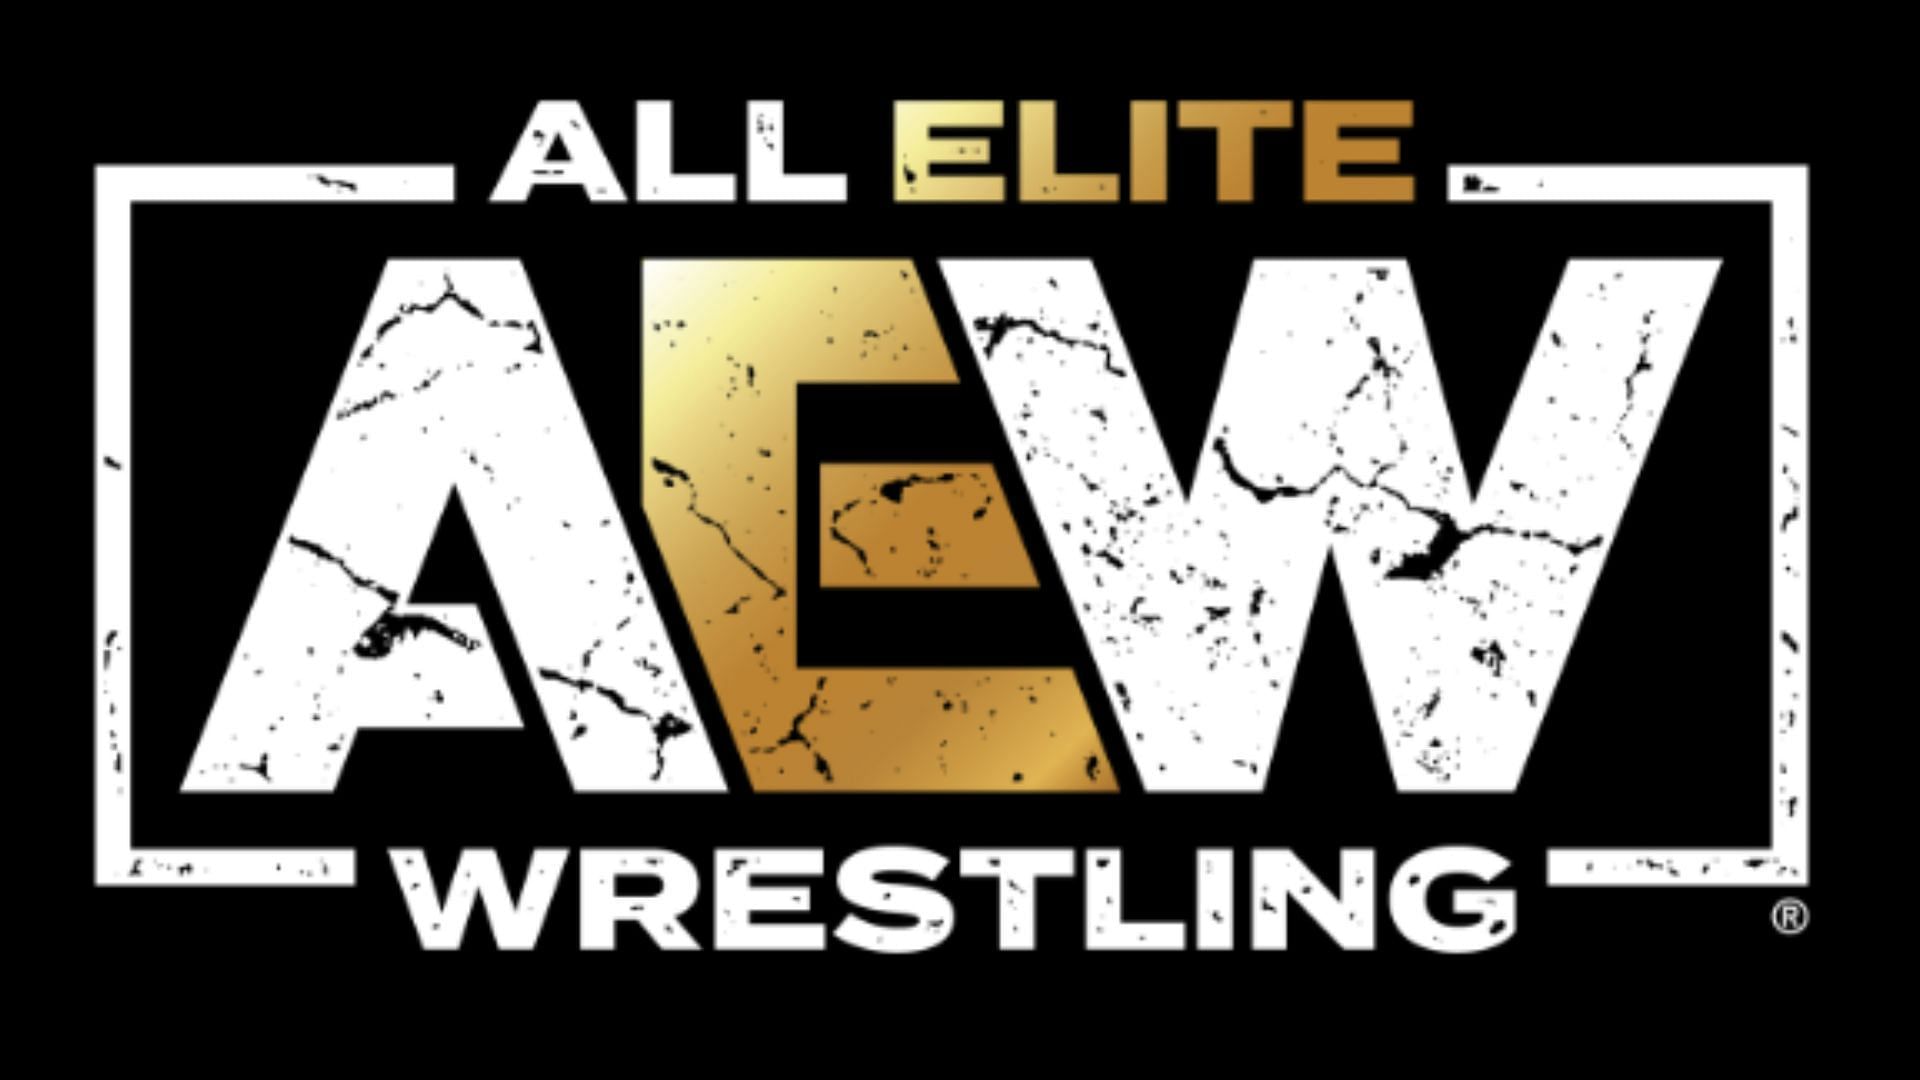 AEW was founded by Tony Khan in 2019